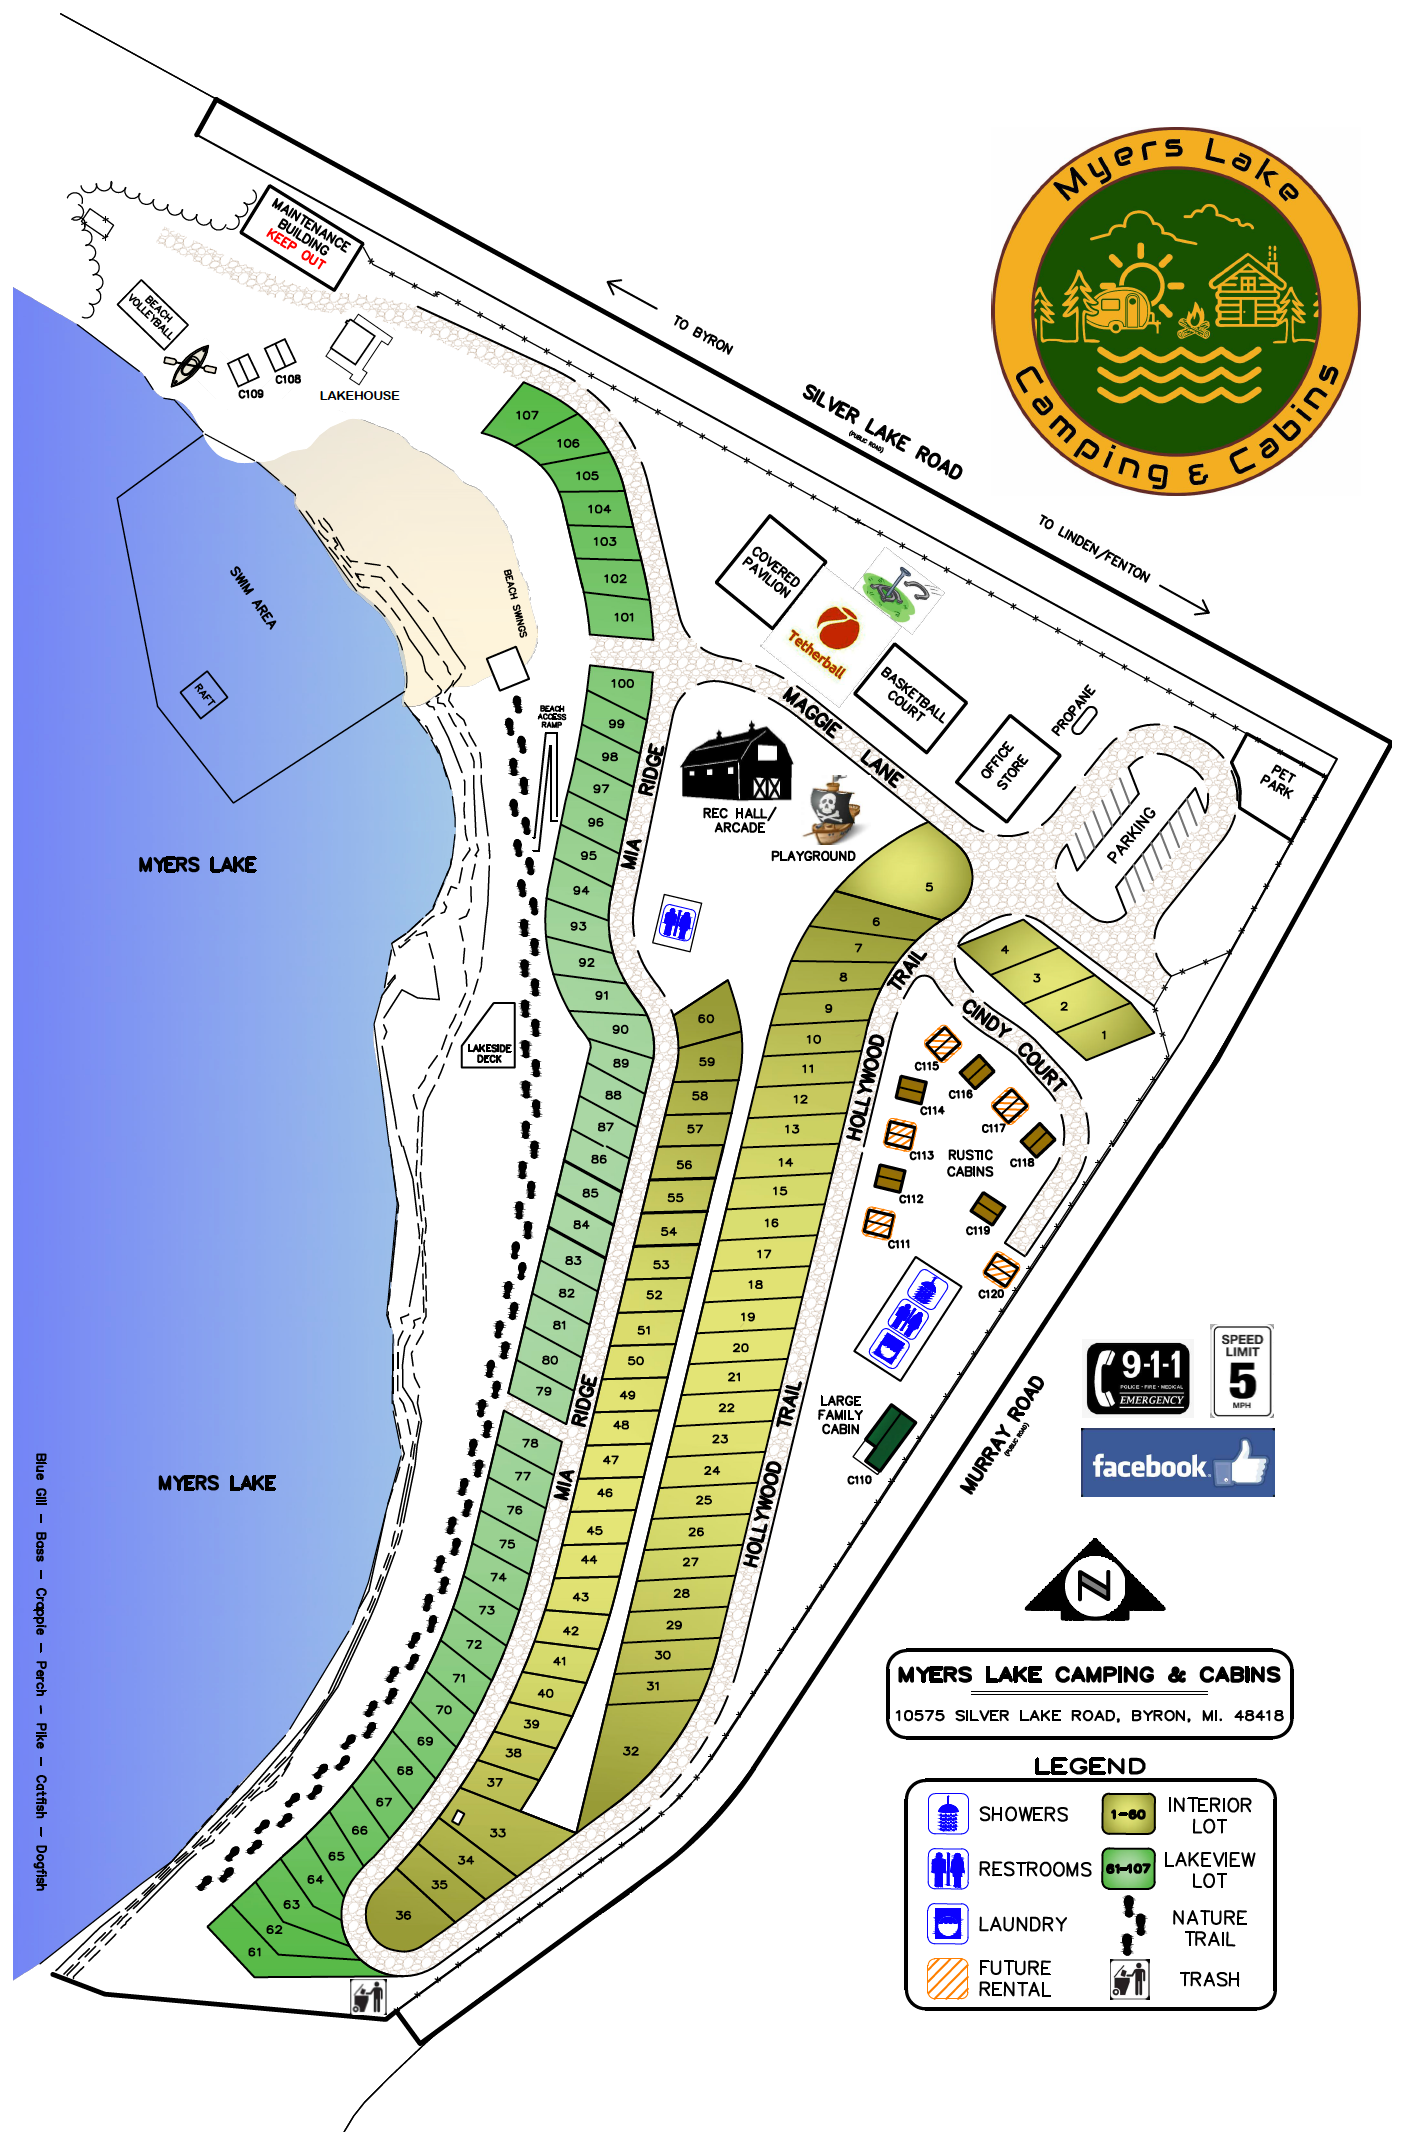 Site Map of Myers Lake Camping & Cabins